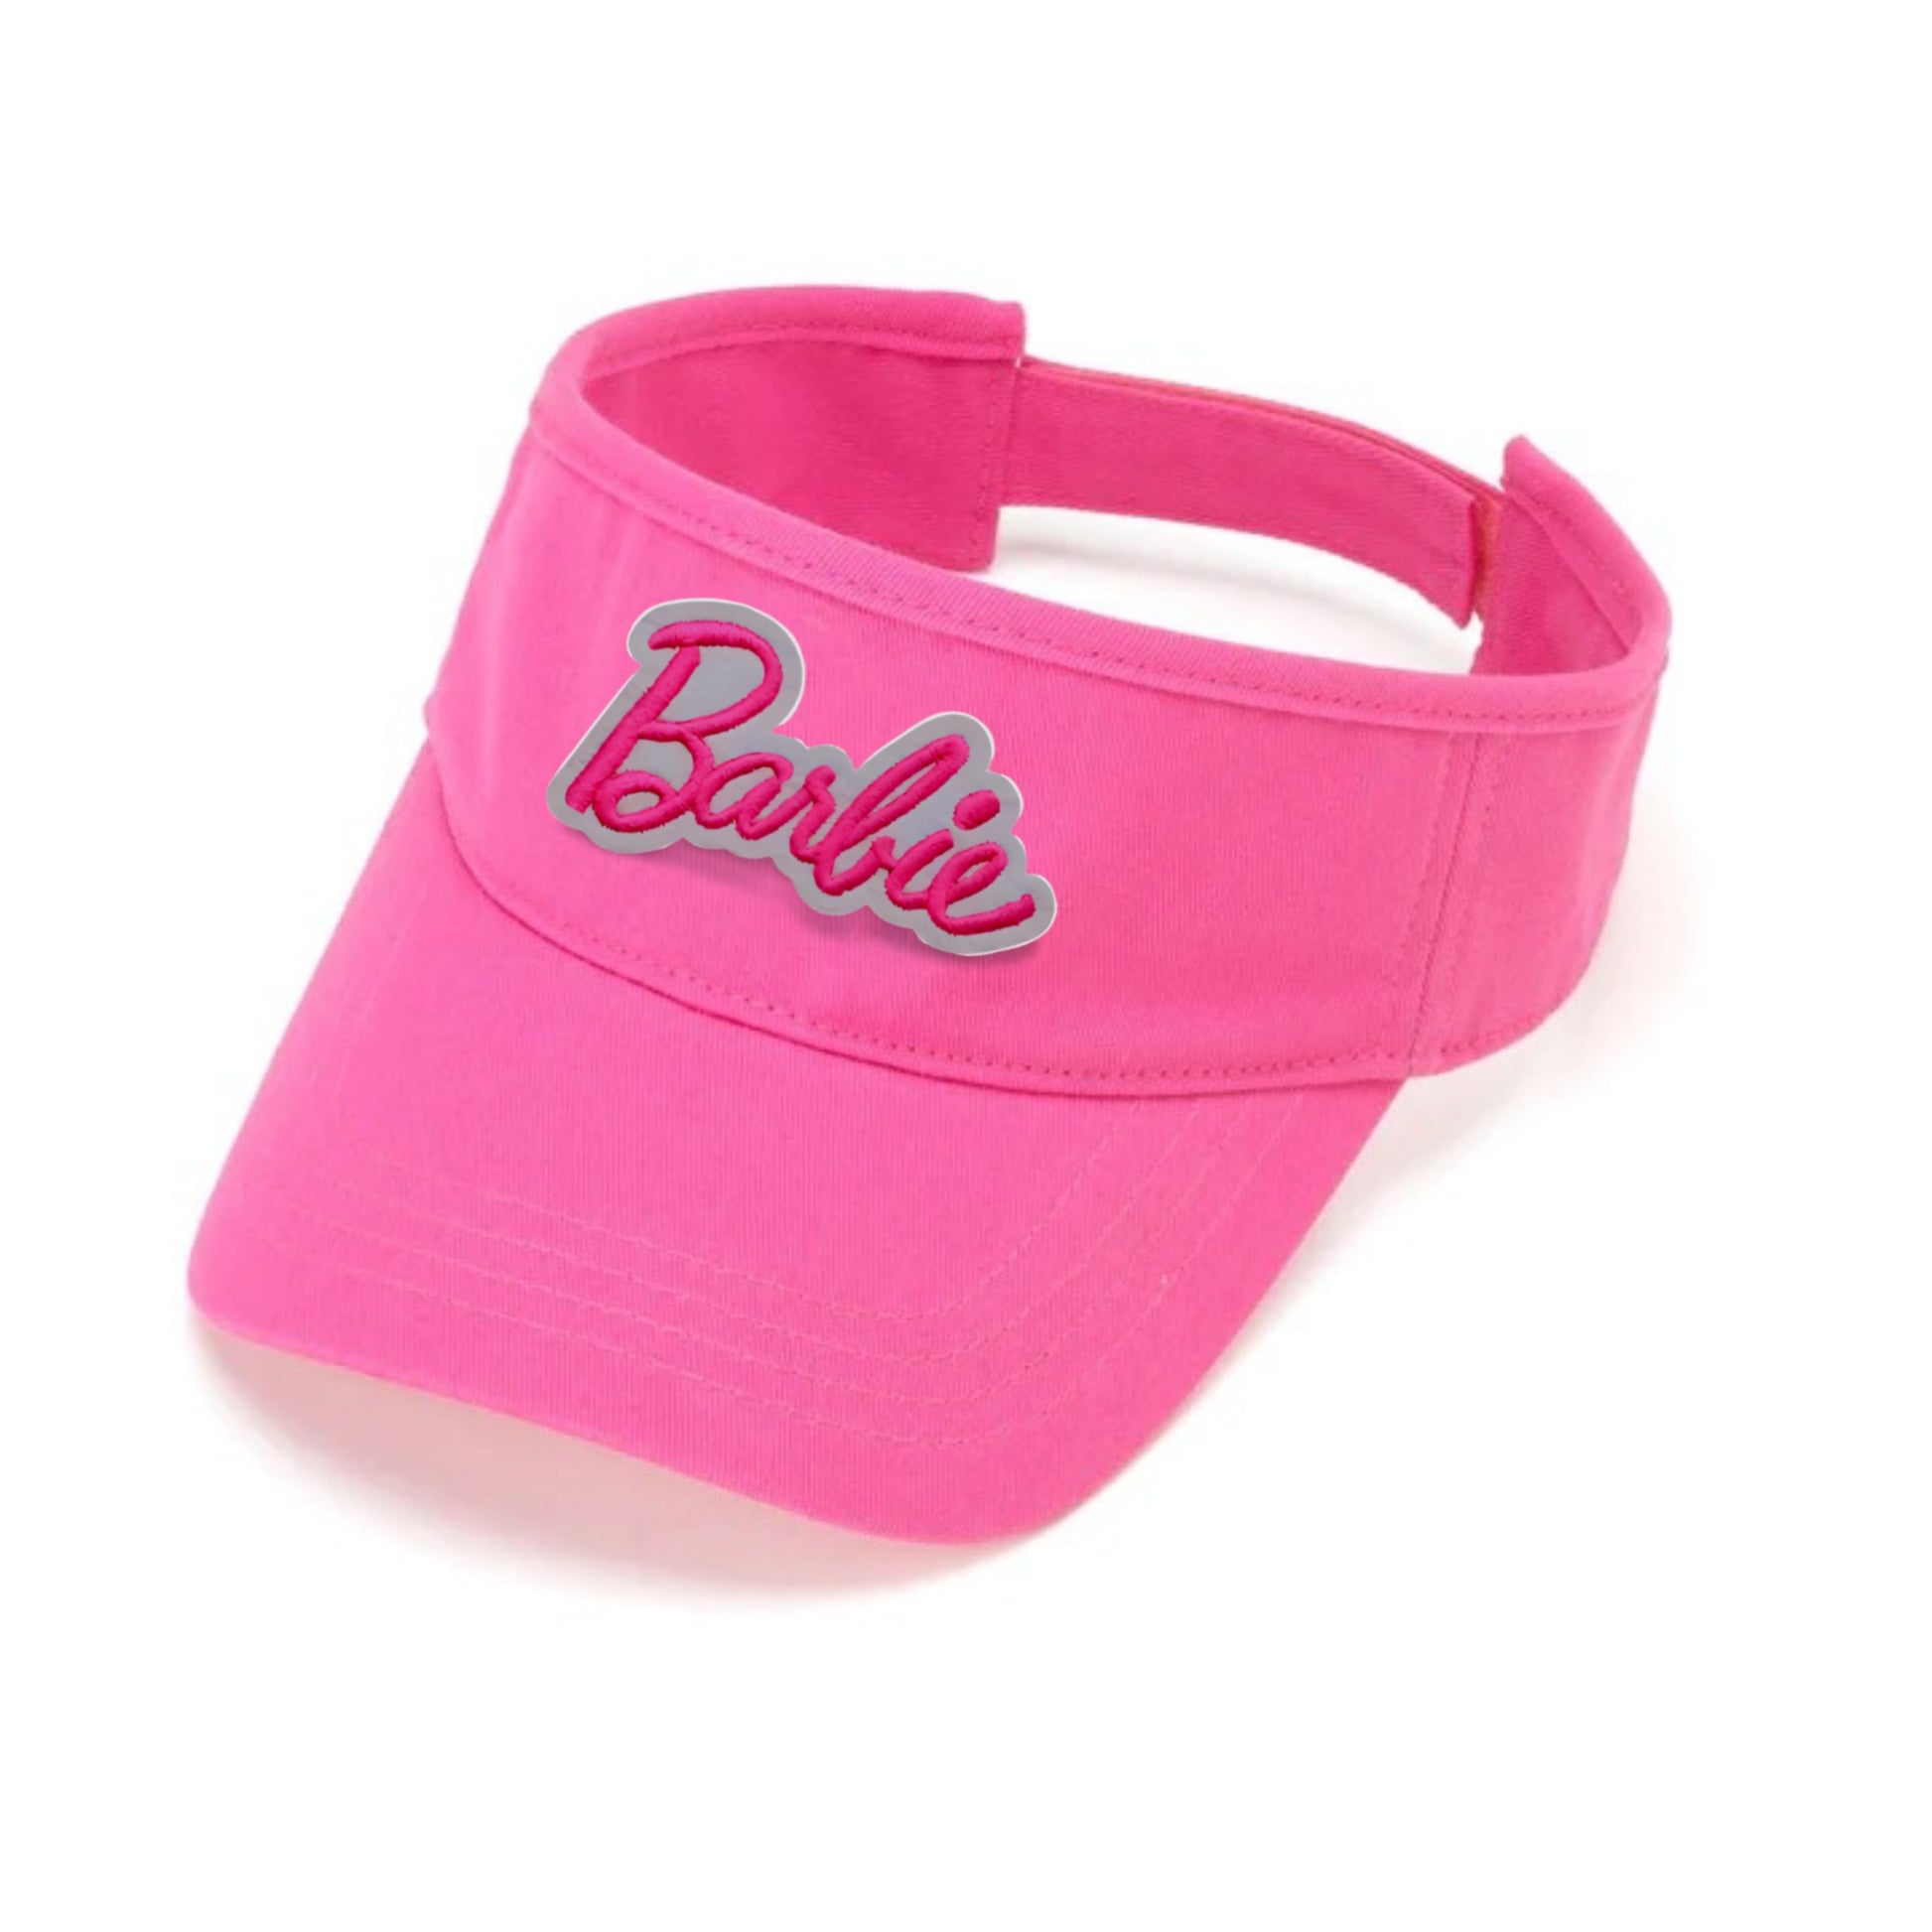 Barbie Visor Hat One Size,Pink Girl Costume,Barbie Back to 80’s and 90’s ,Workout outfit Barbie